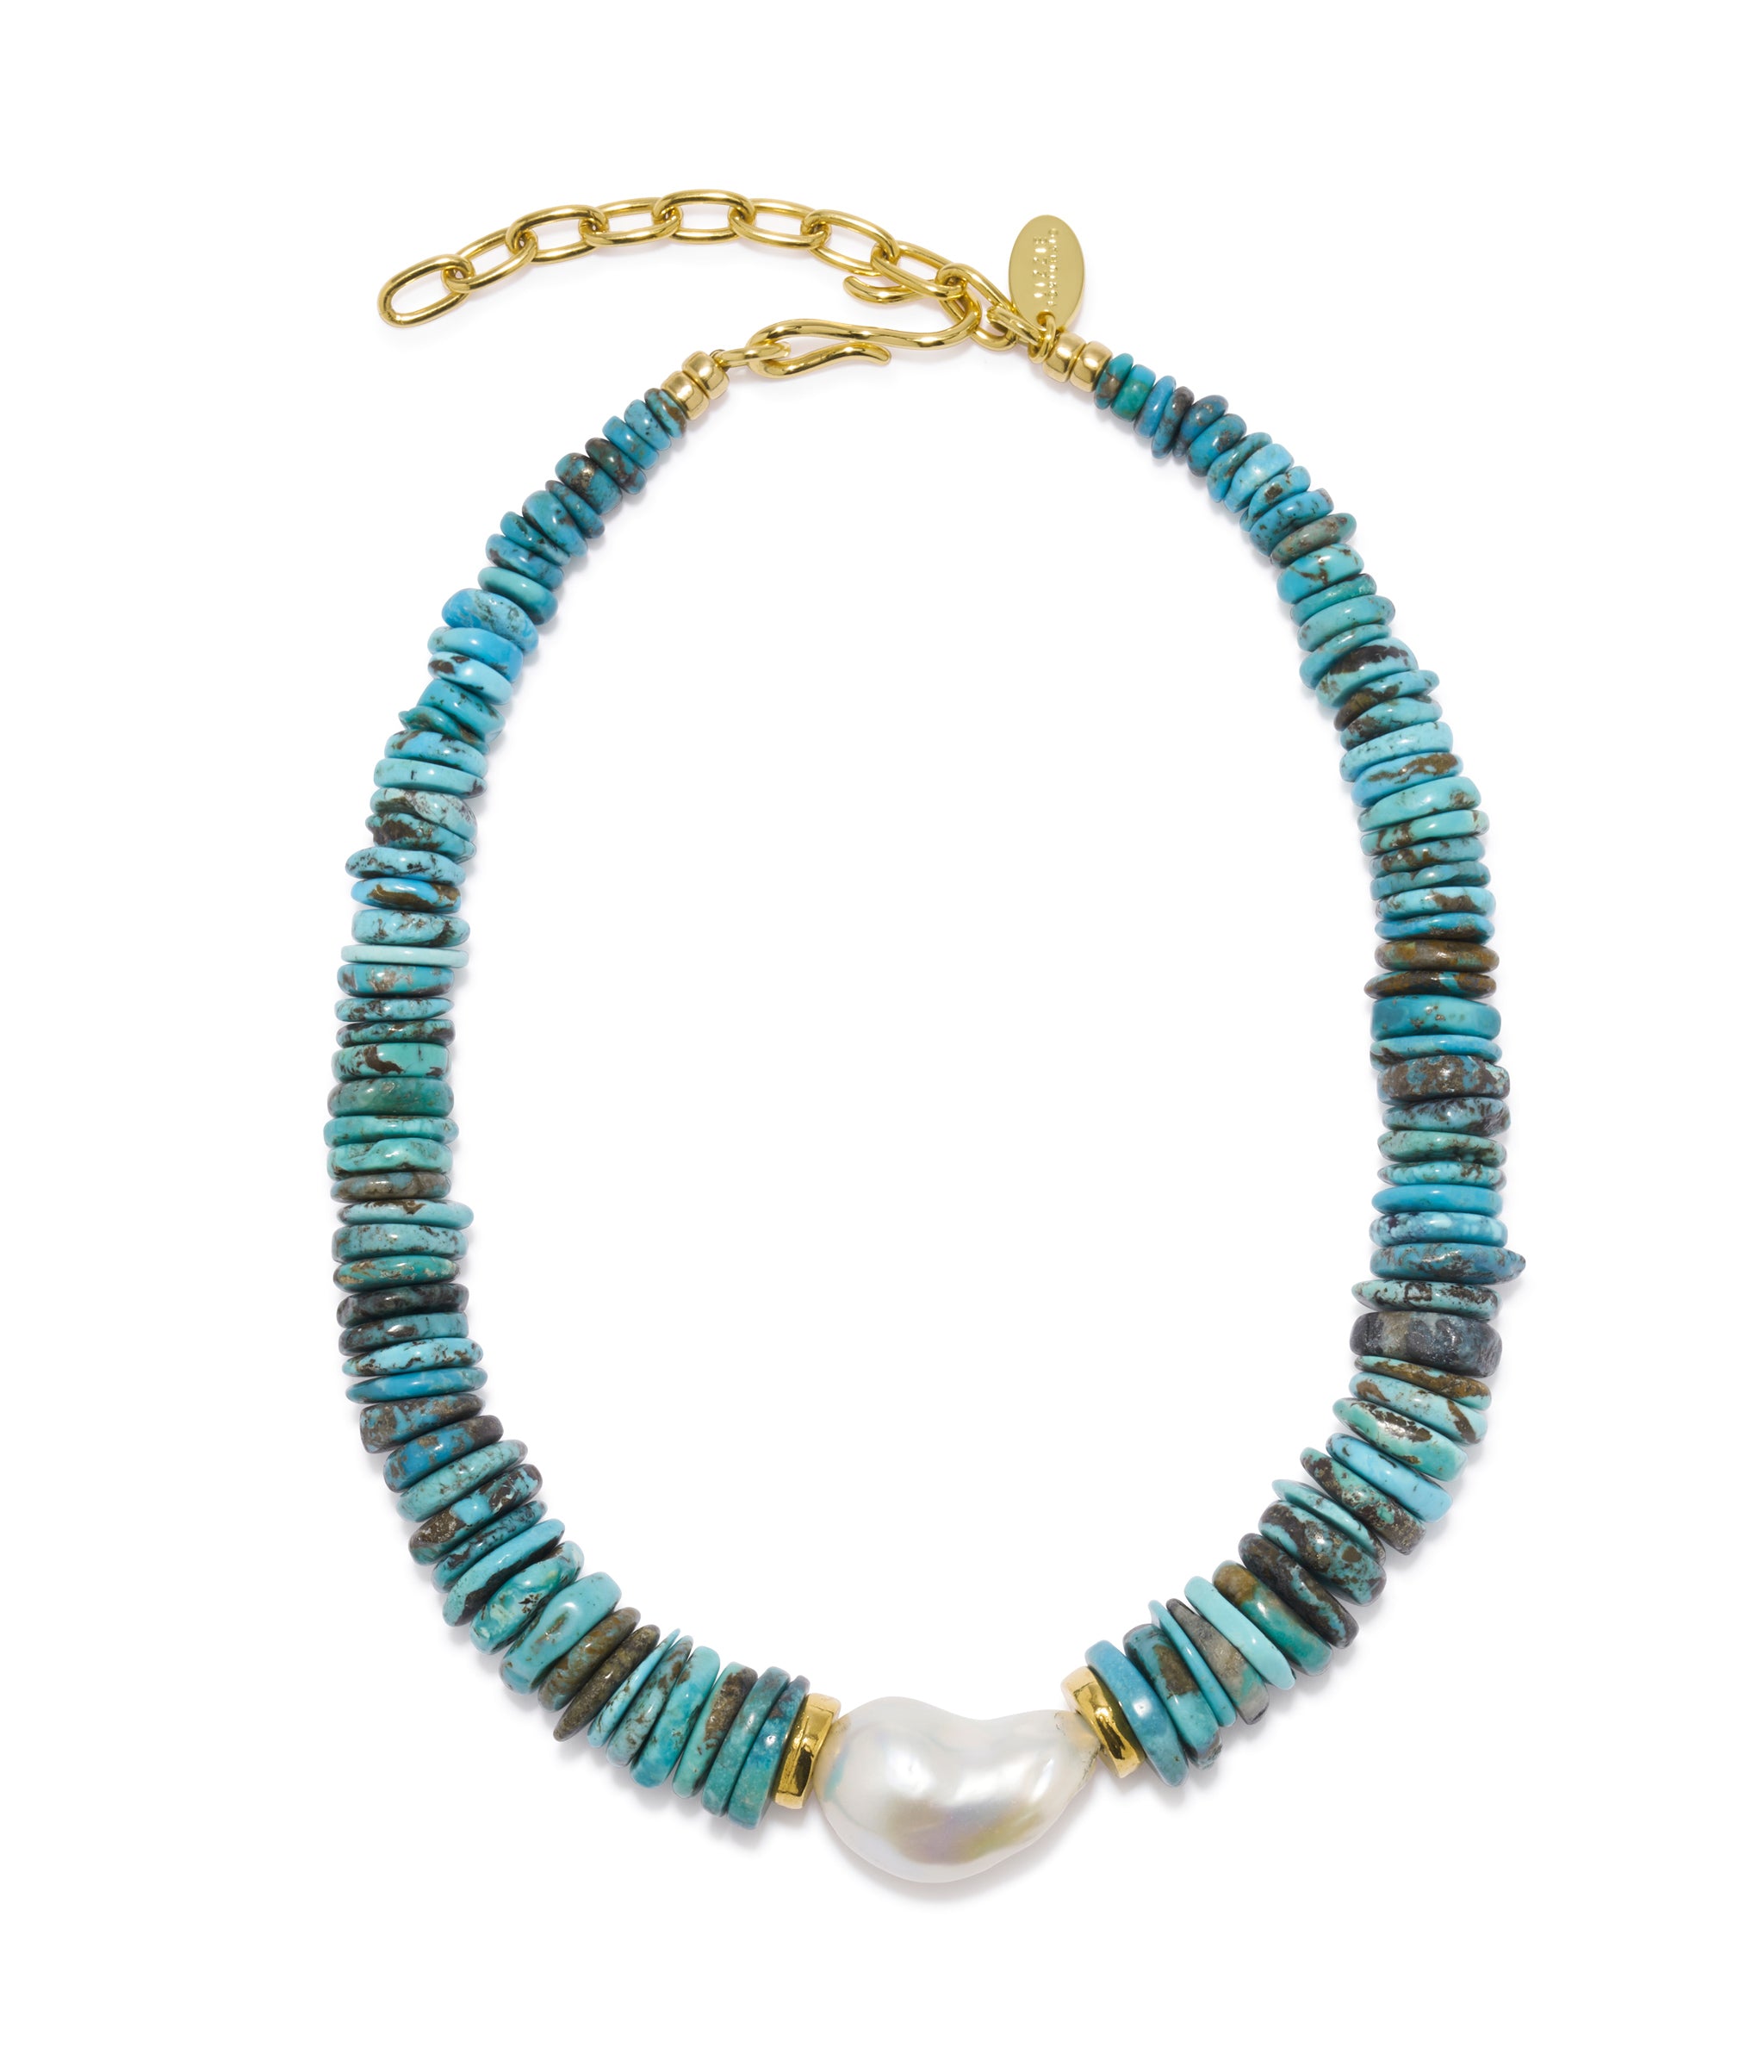 Sky Stone Necklace. Statement single strand of natural turquoise with large freshwater pearl and gold-plated closure.